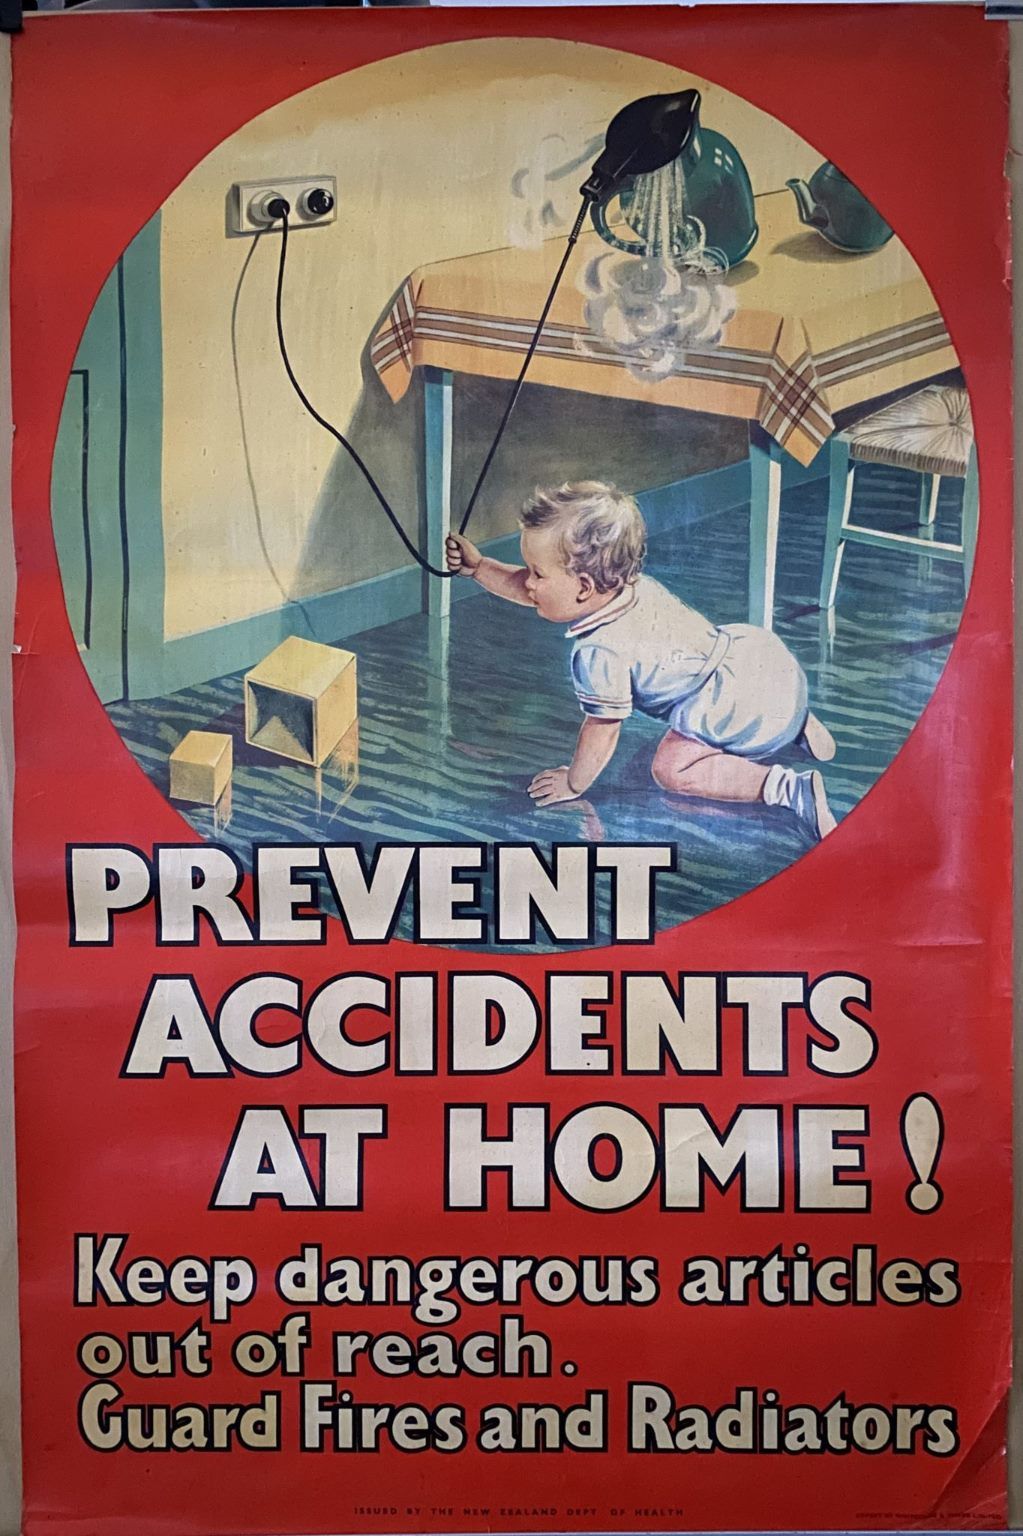 VINTAGE POSTER: New Zealand Department of Health / Home Safety